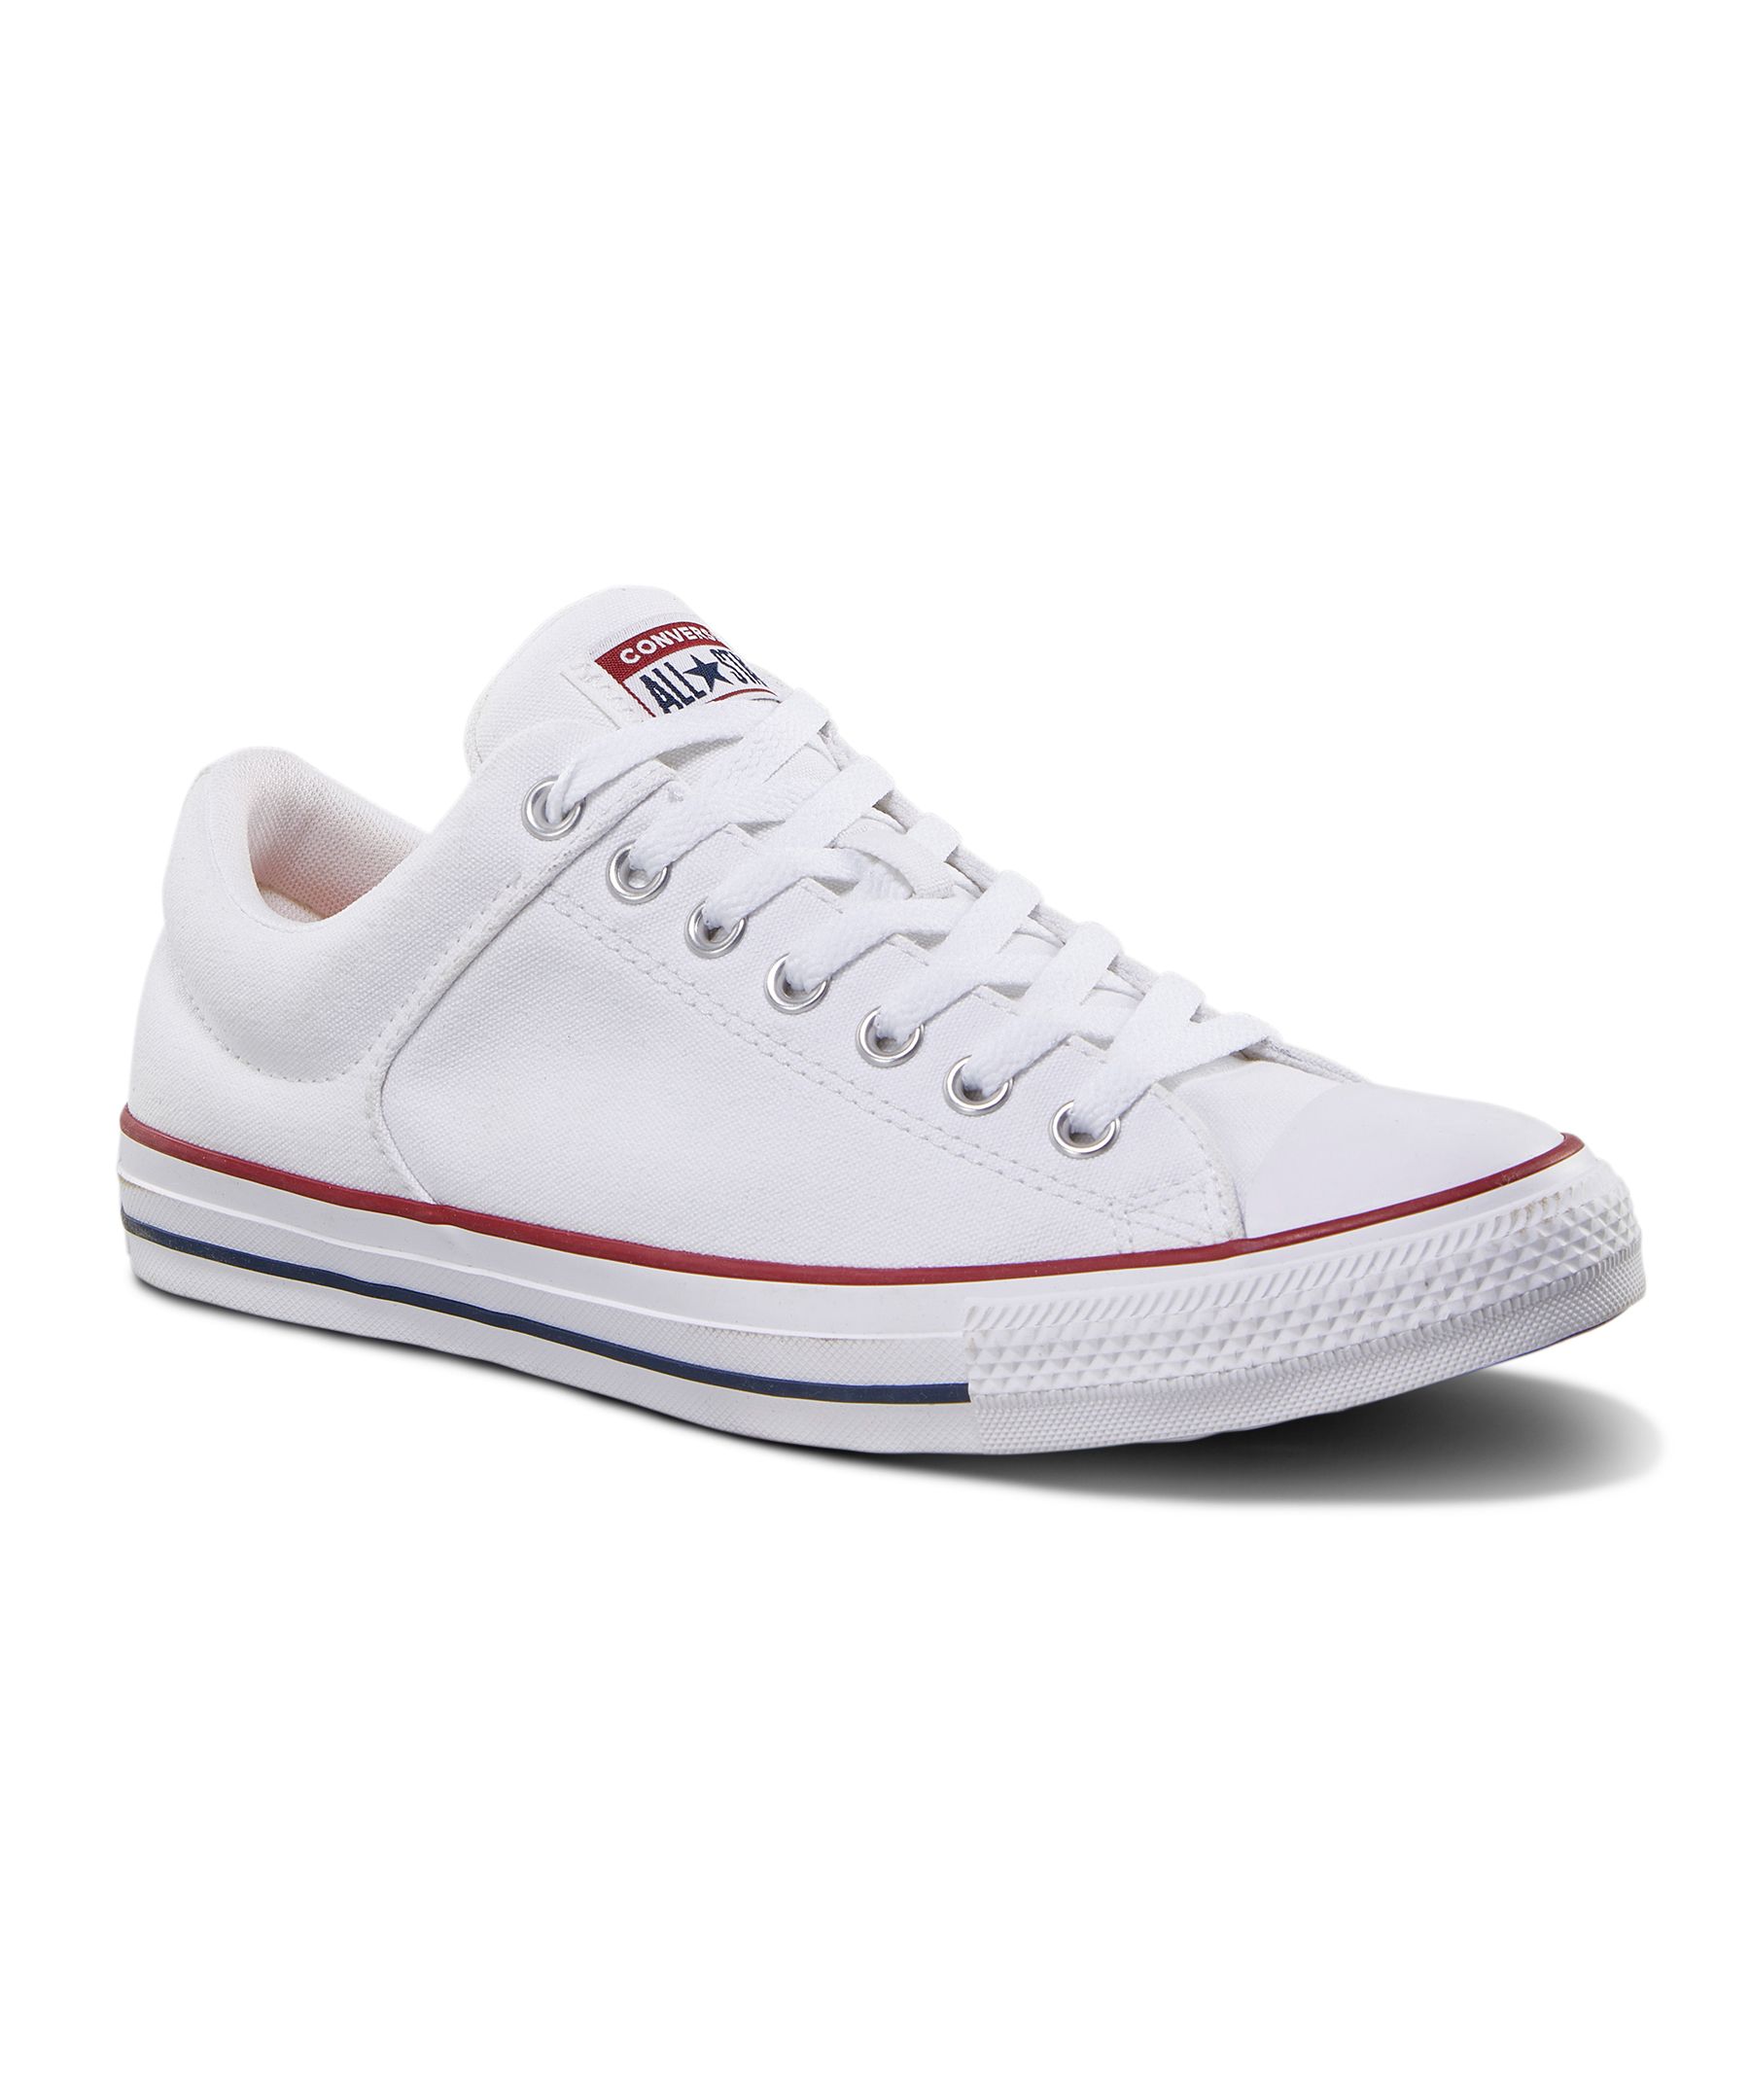 Converse Men's Chuck Taylor All Star High Street Low Top Lace Up ...